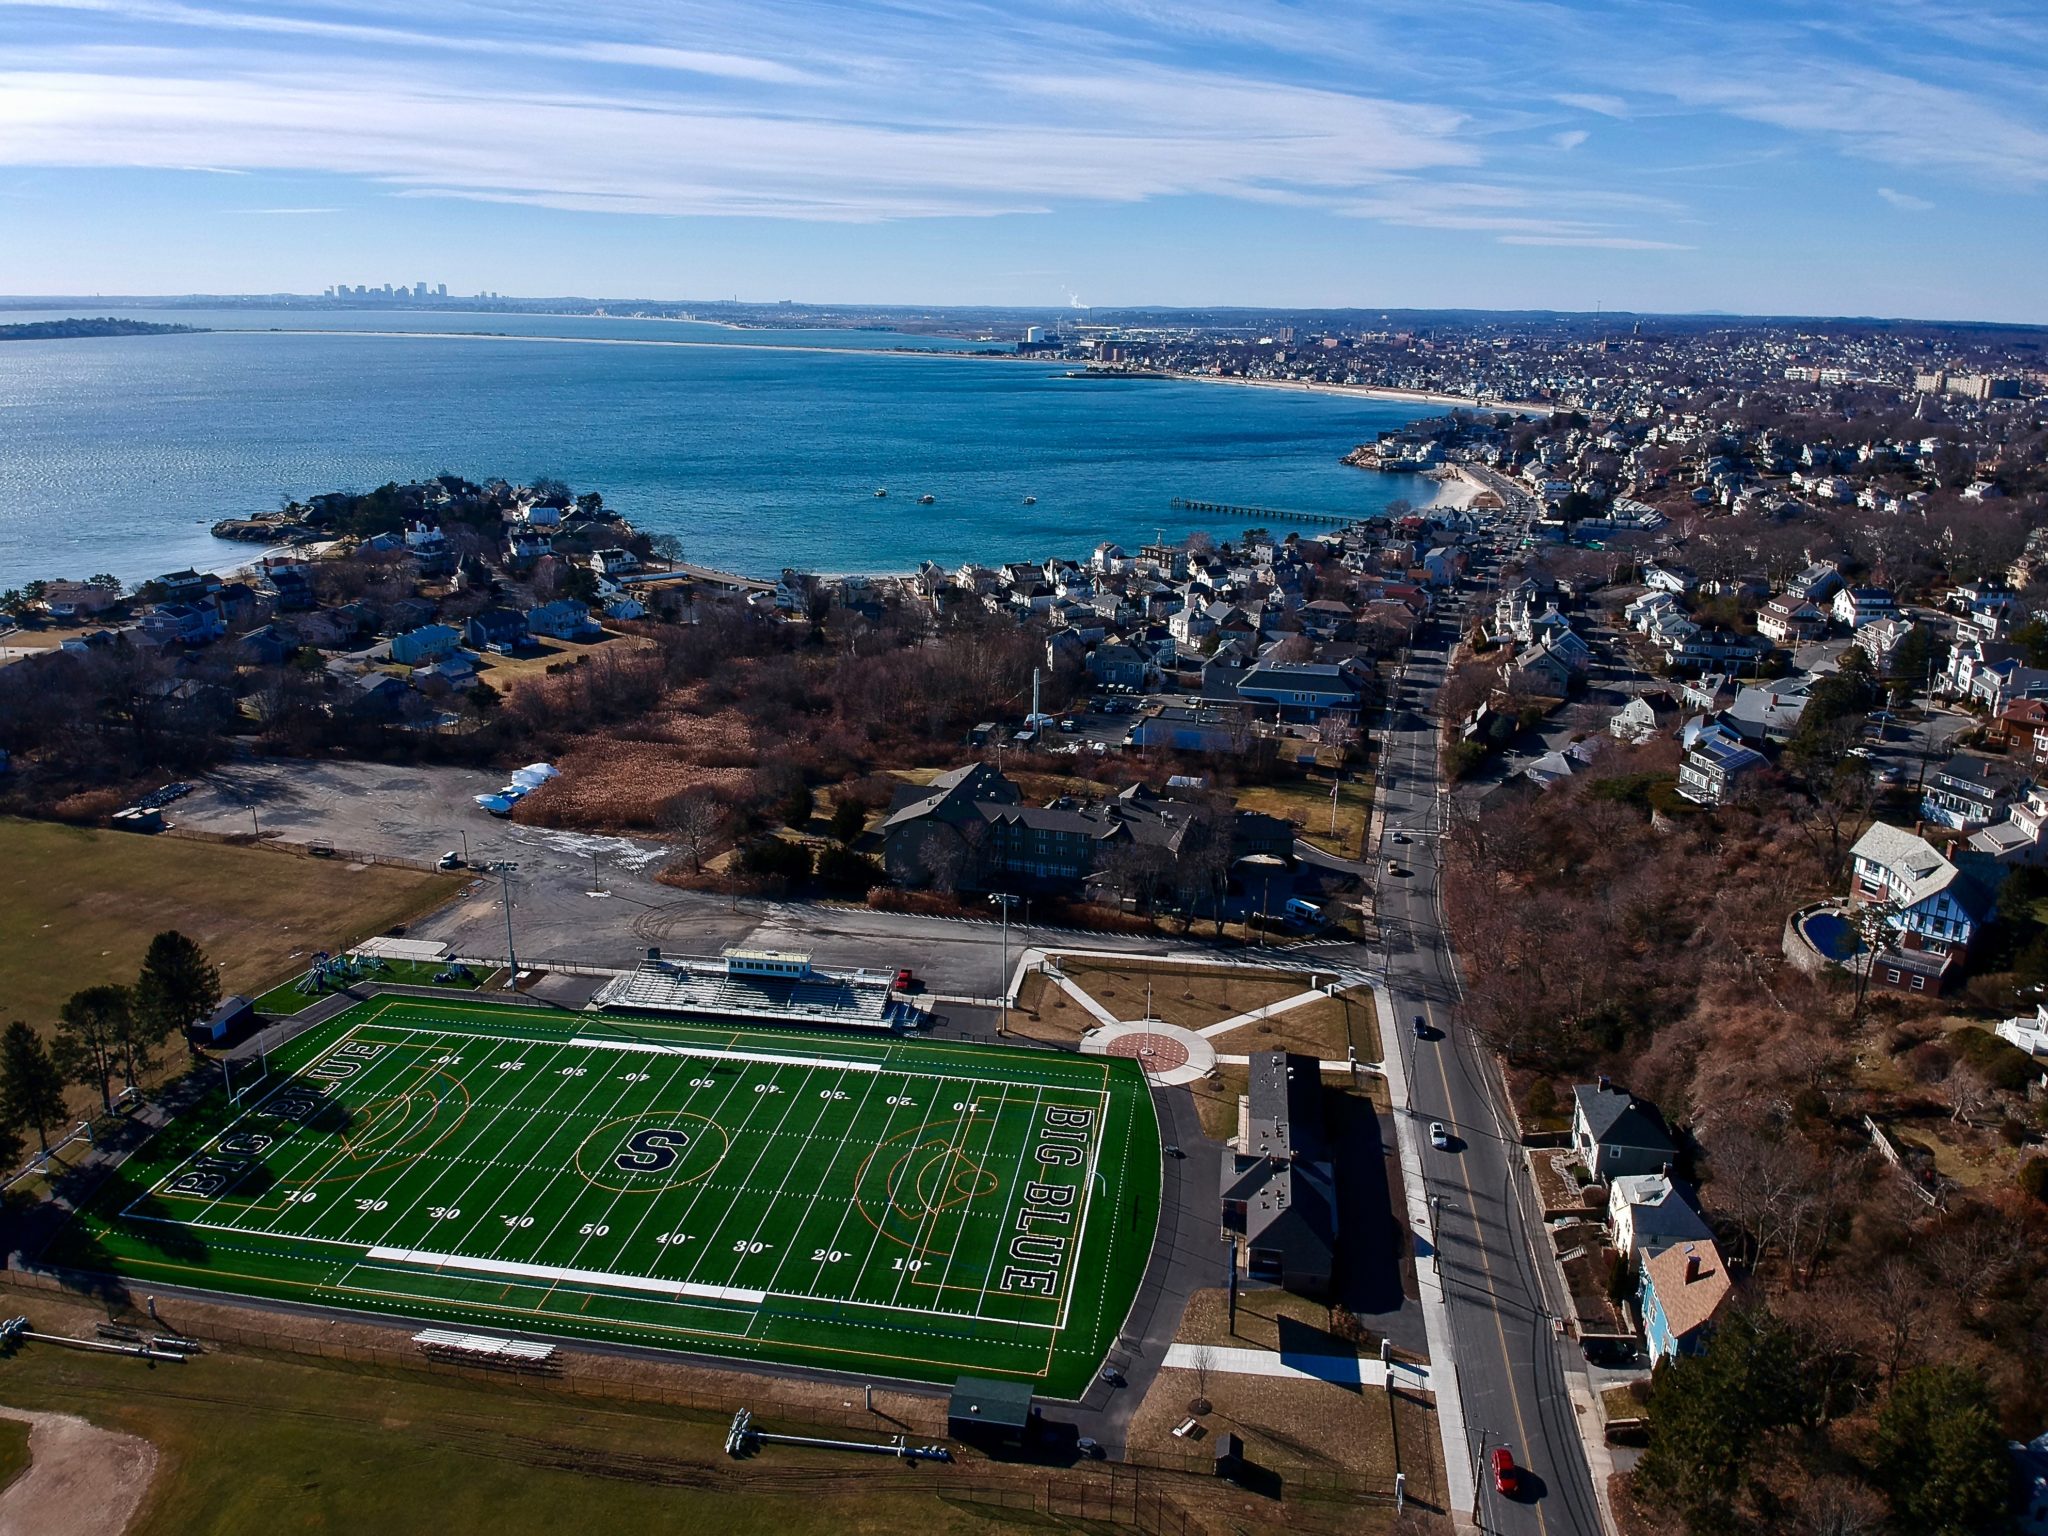 Daniel Tibbetts took this photo of the new football field & the ocean